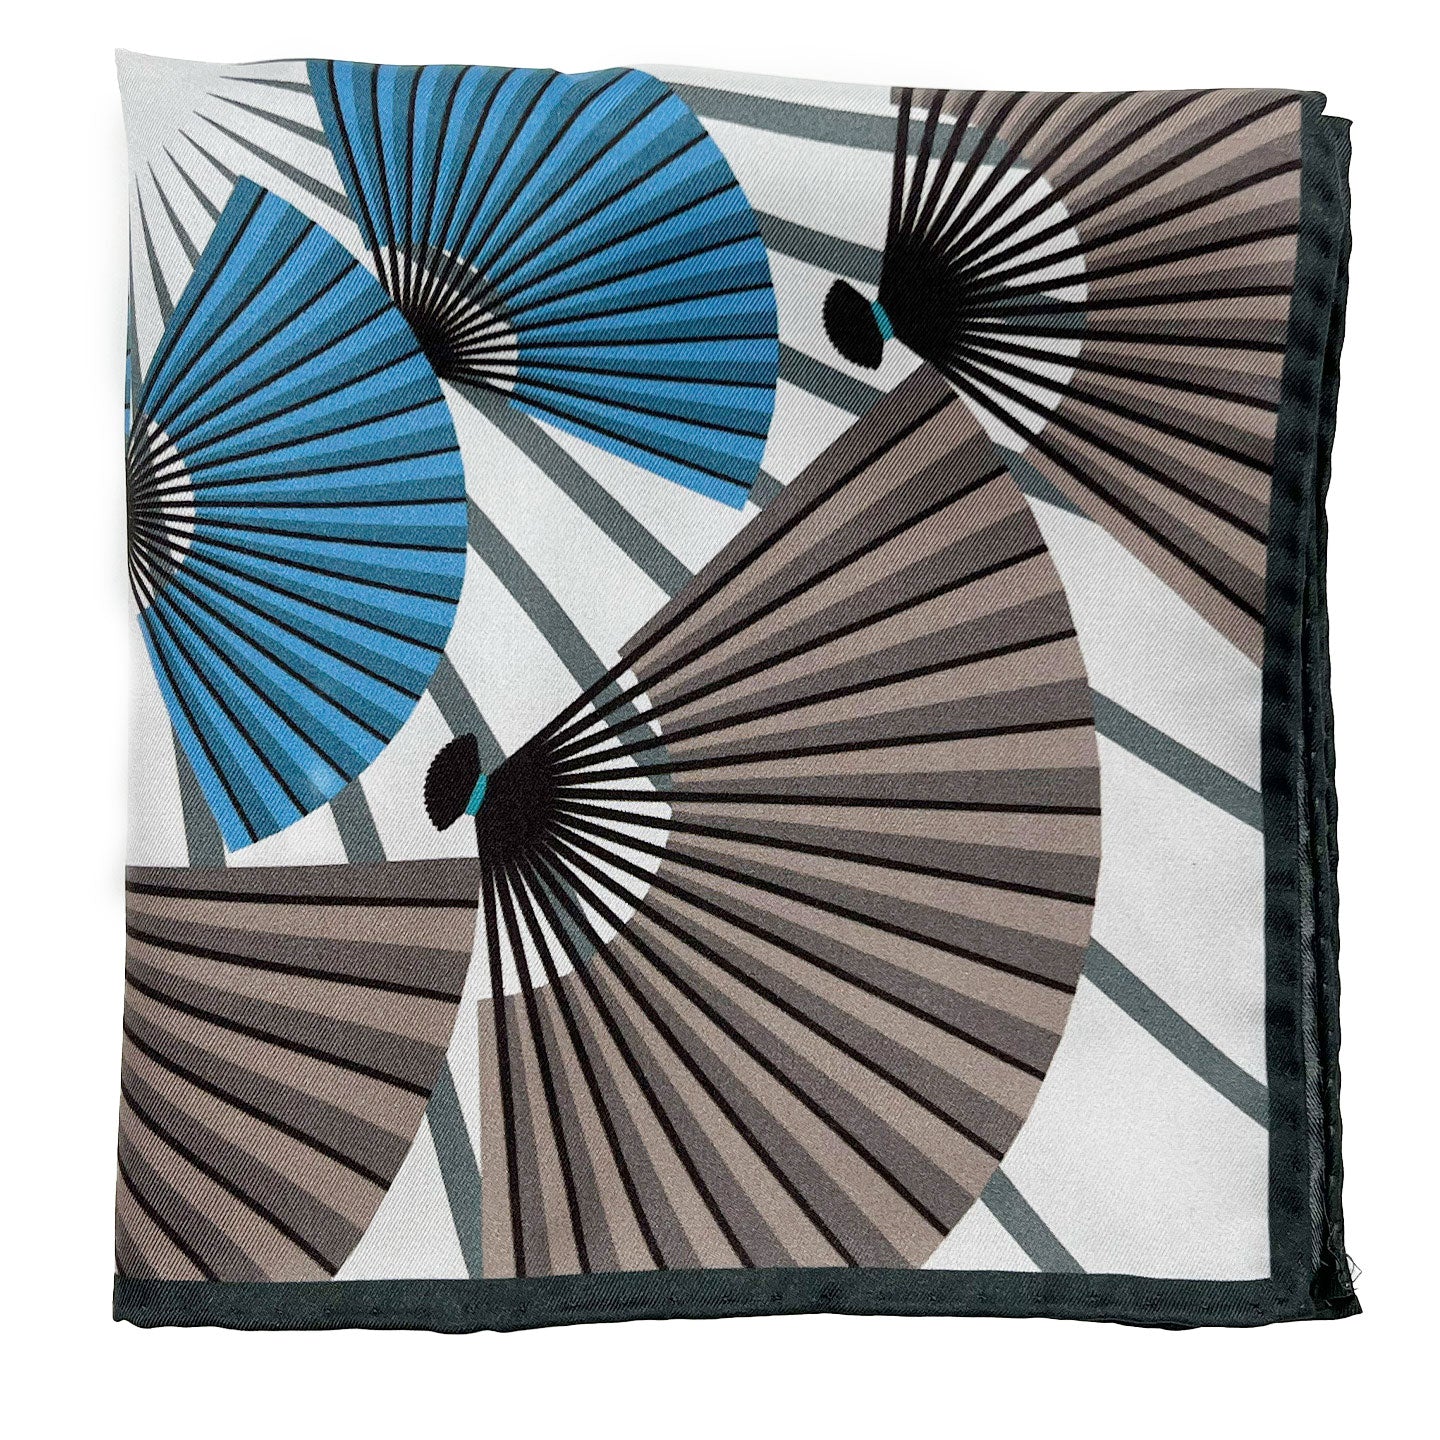 Folded Japanese fan motif pocket square in pure silk on a white background.